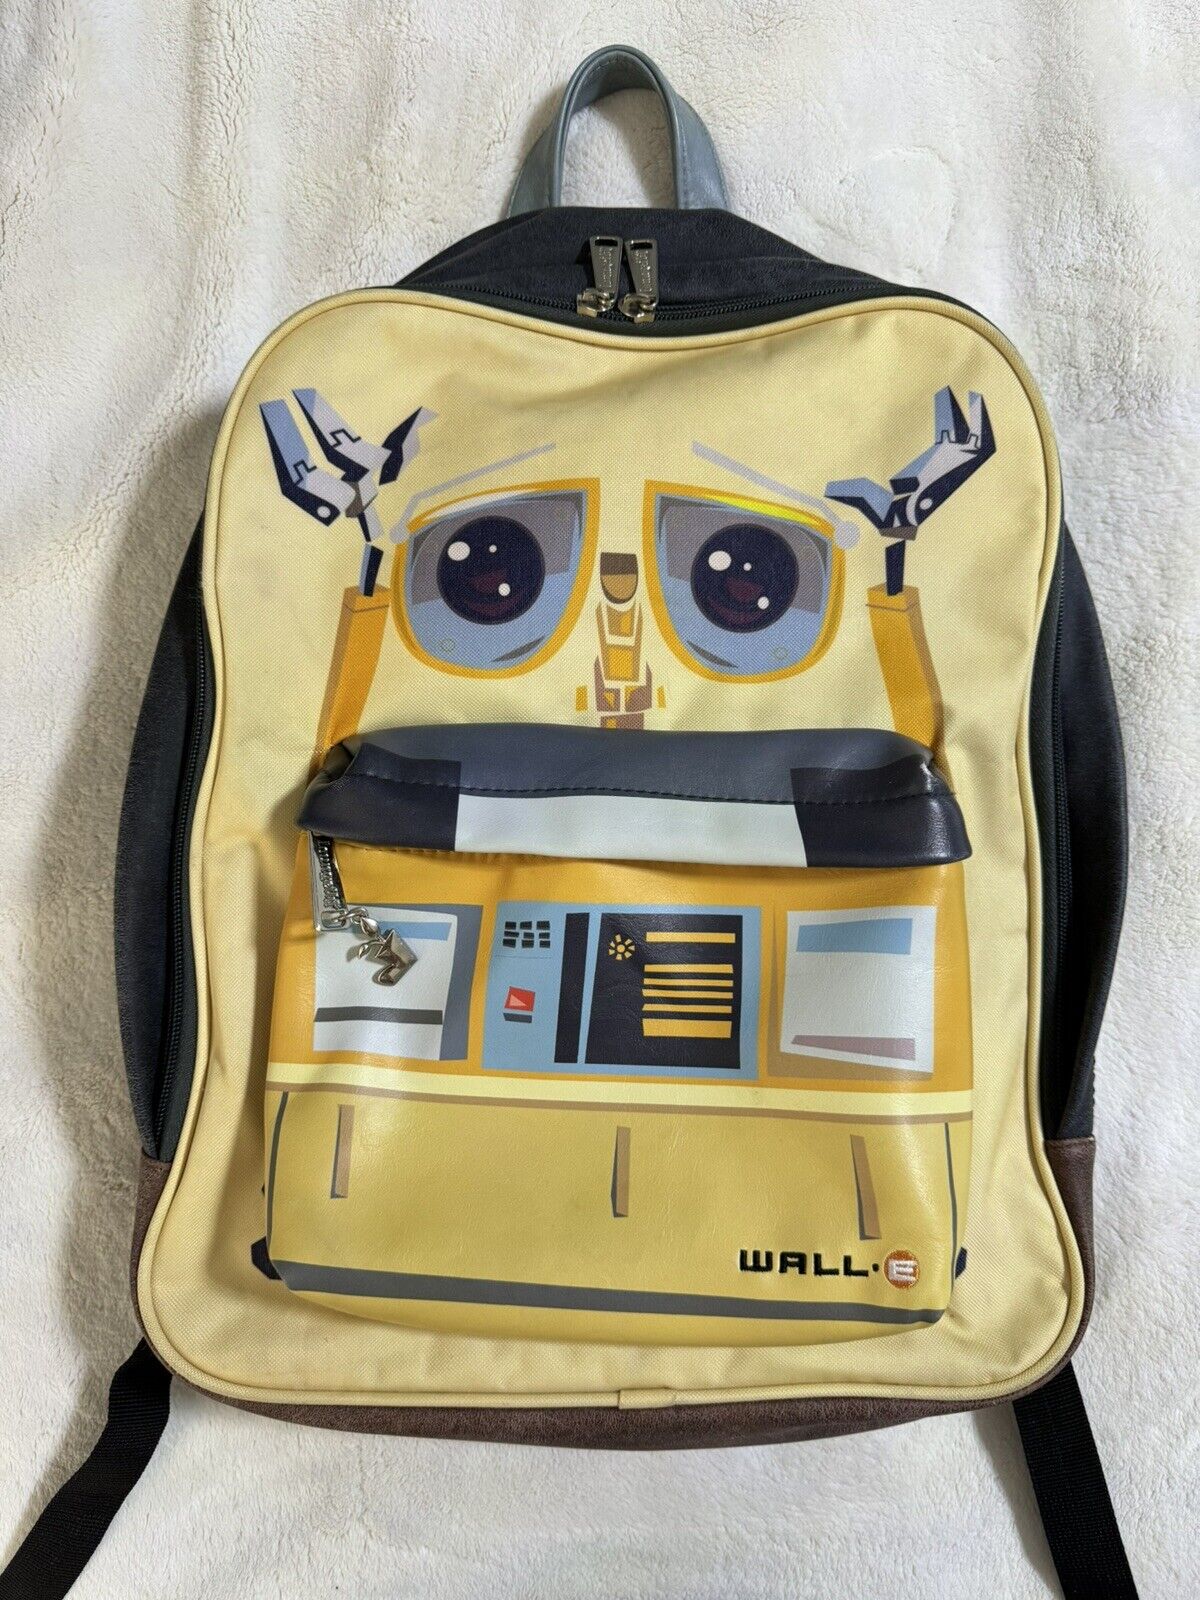 Loungefly Disney Pixar Yellow Wall-E Backpack School Laptop Bag Used DETAILS